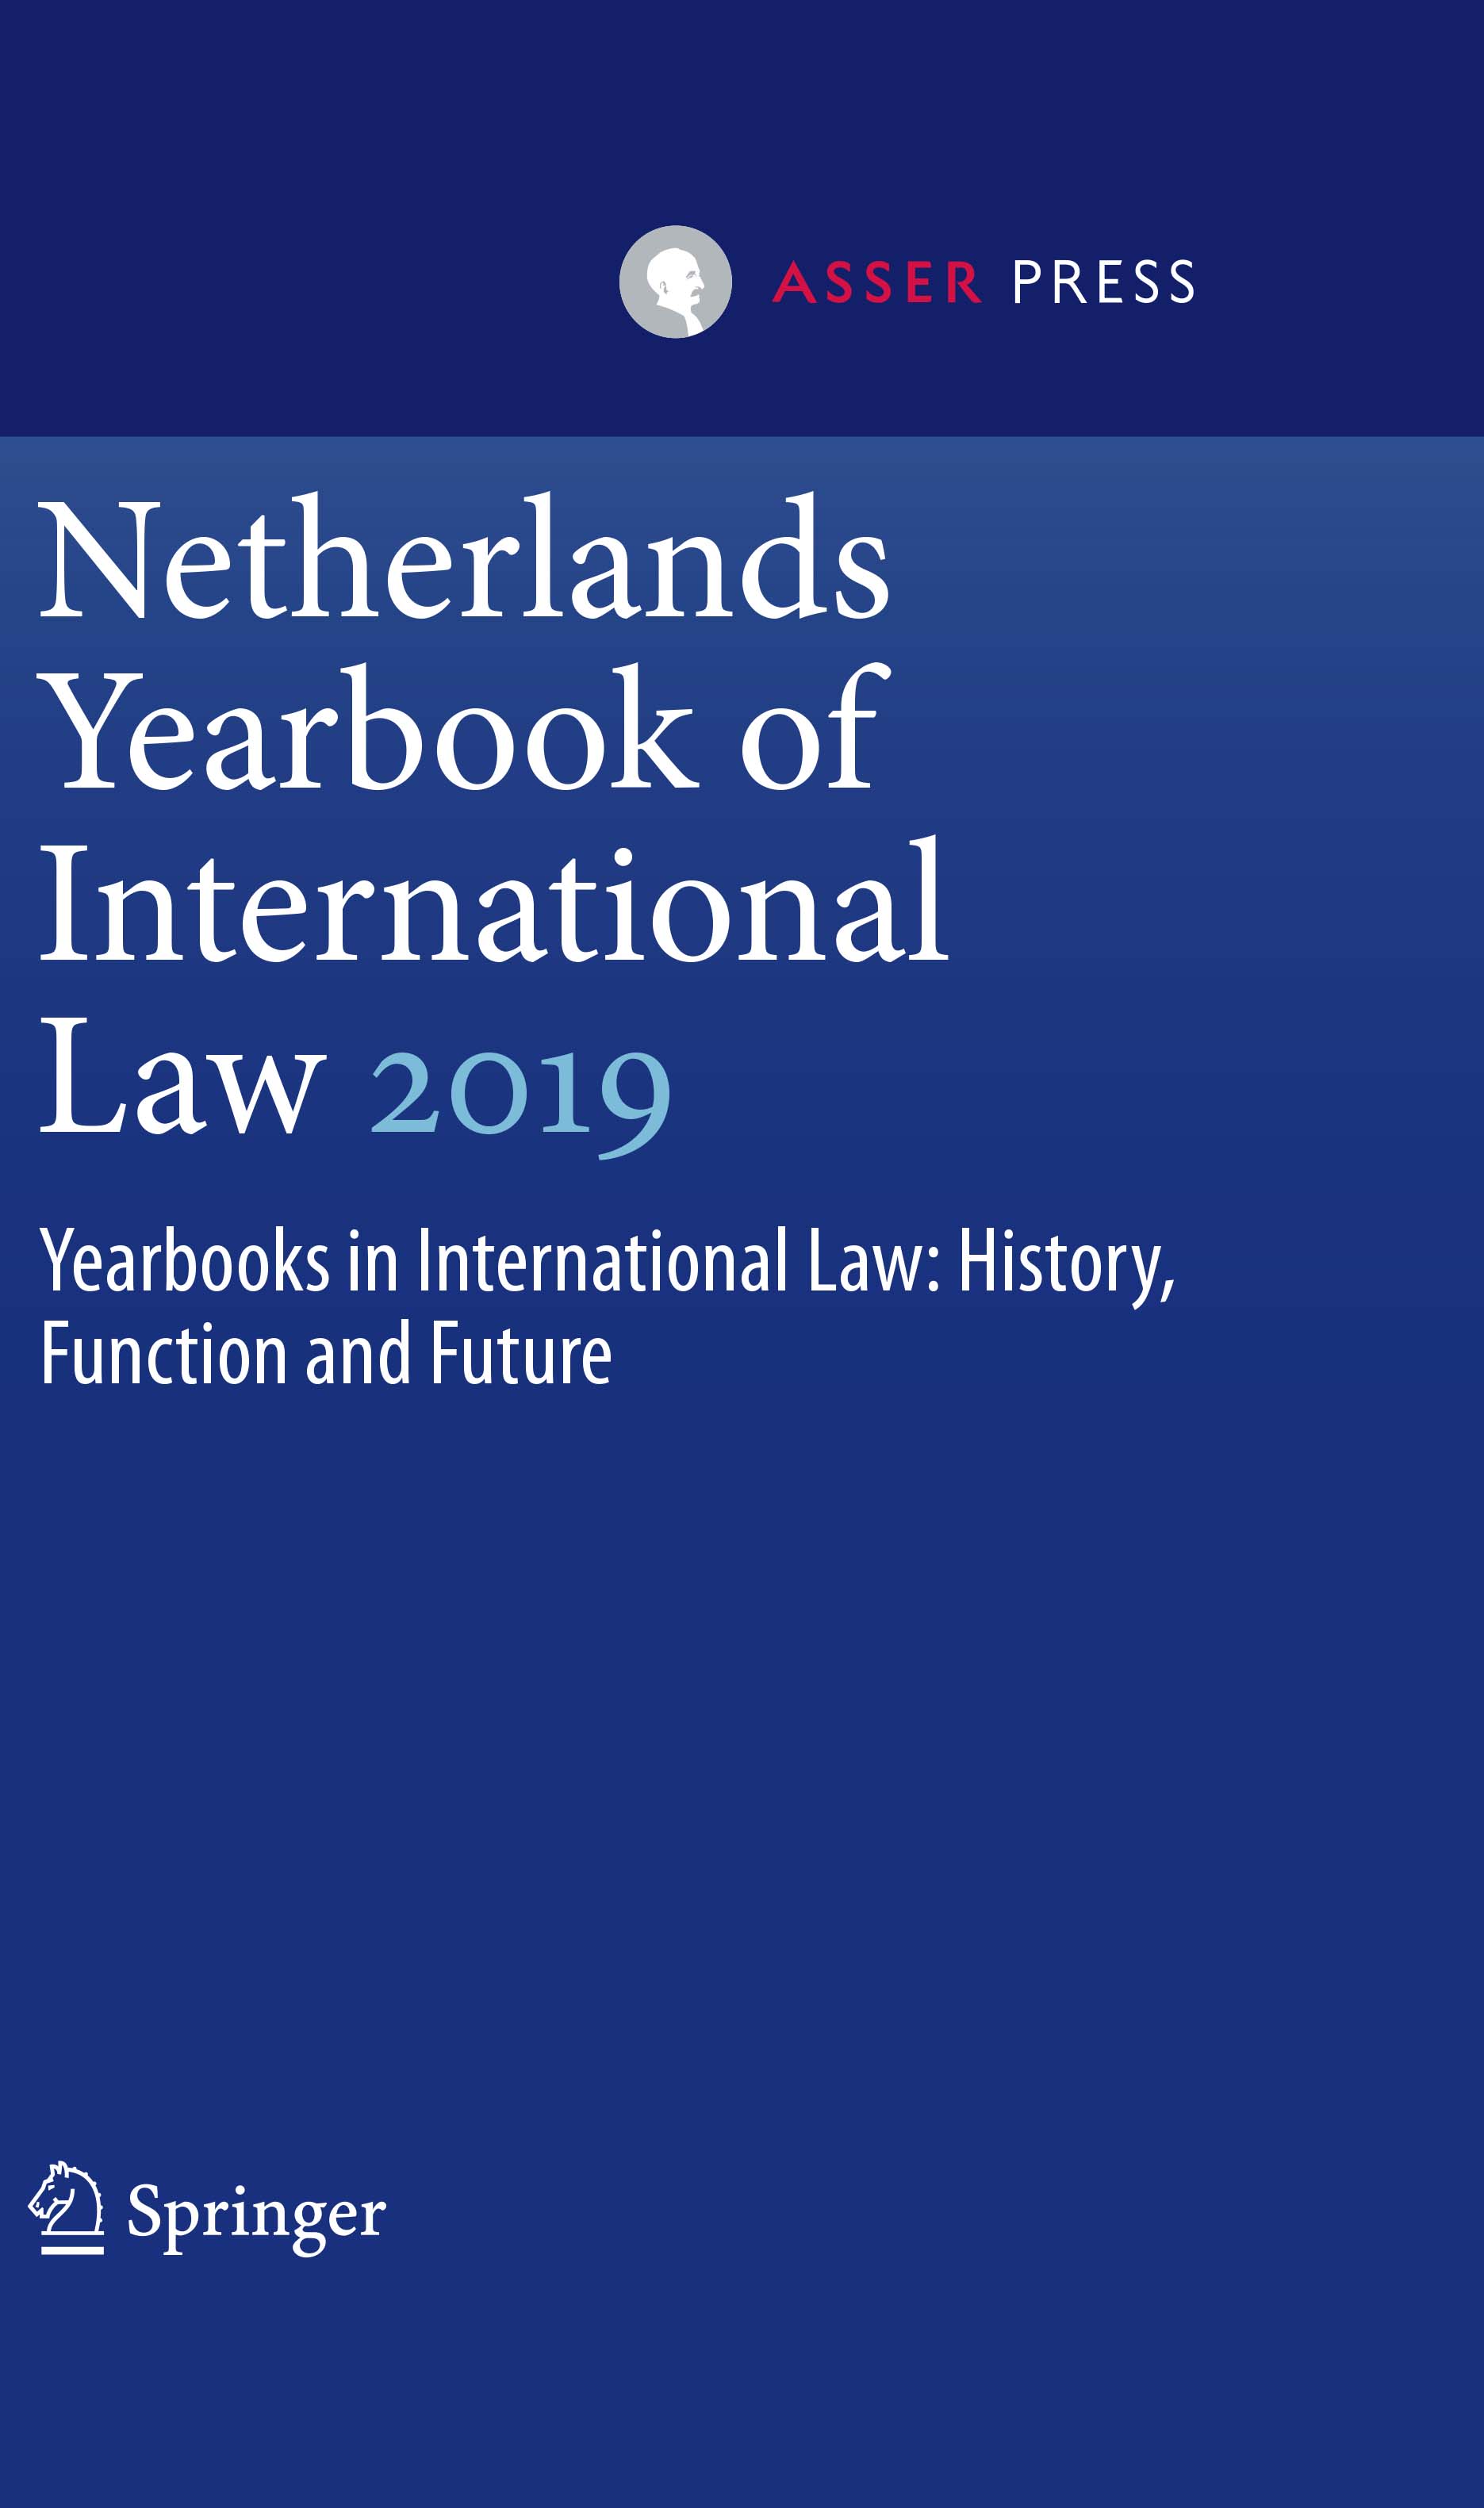 Netherlands Yearbook of International Law 2019 - Yearbooks in International Law: History, Function and Future (50th Volume)